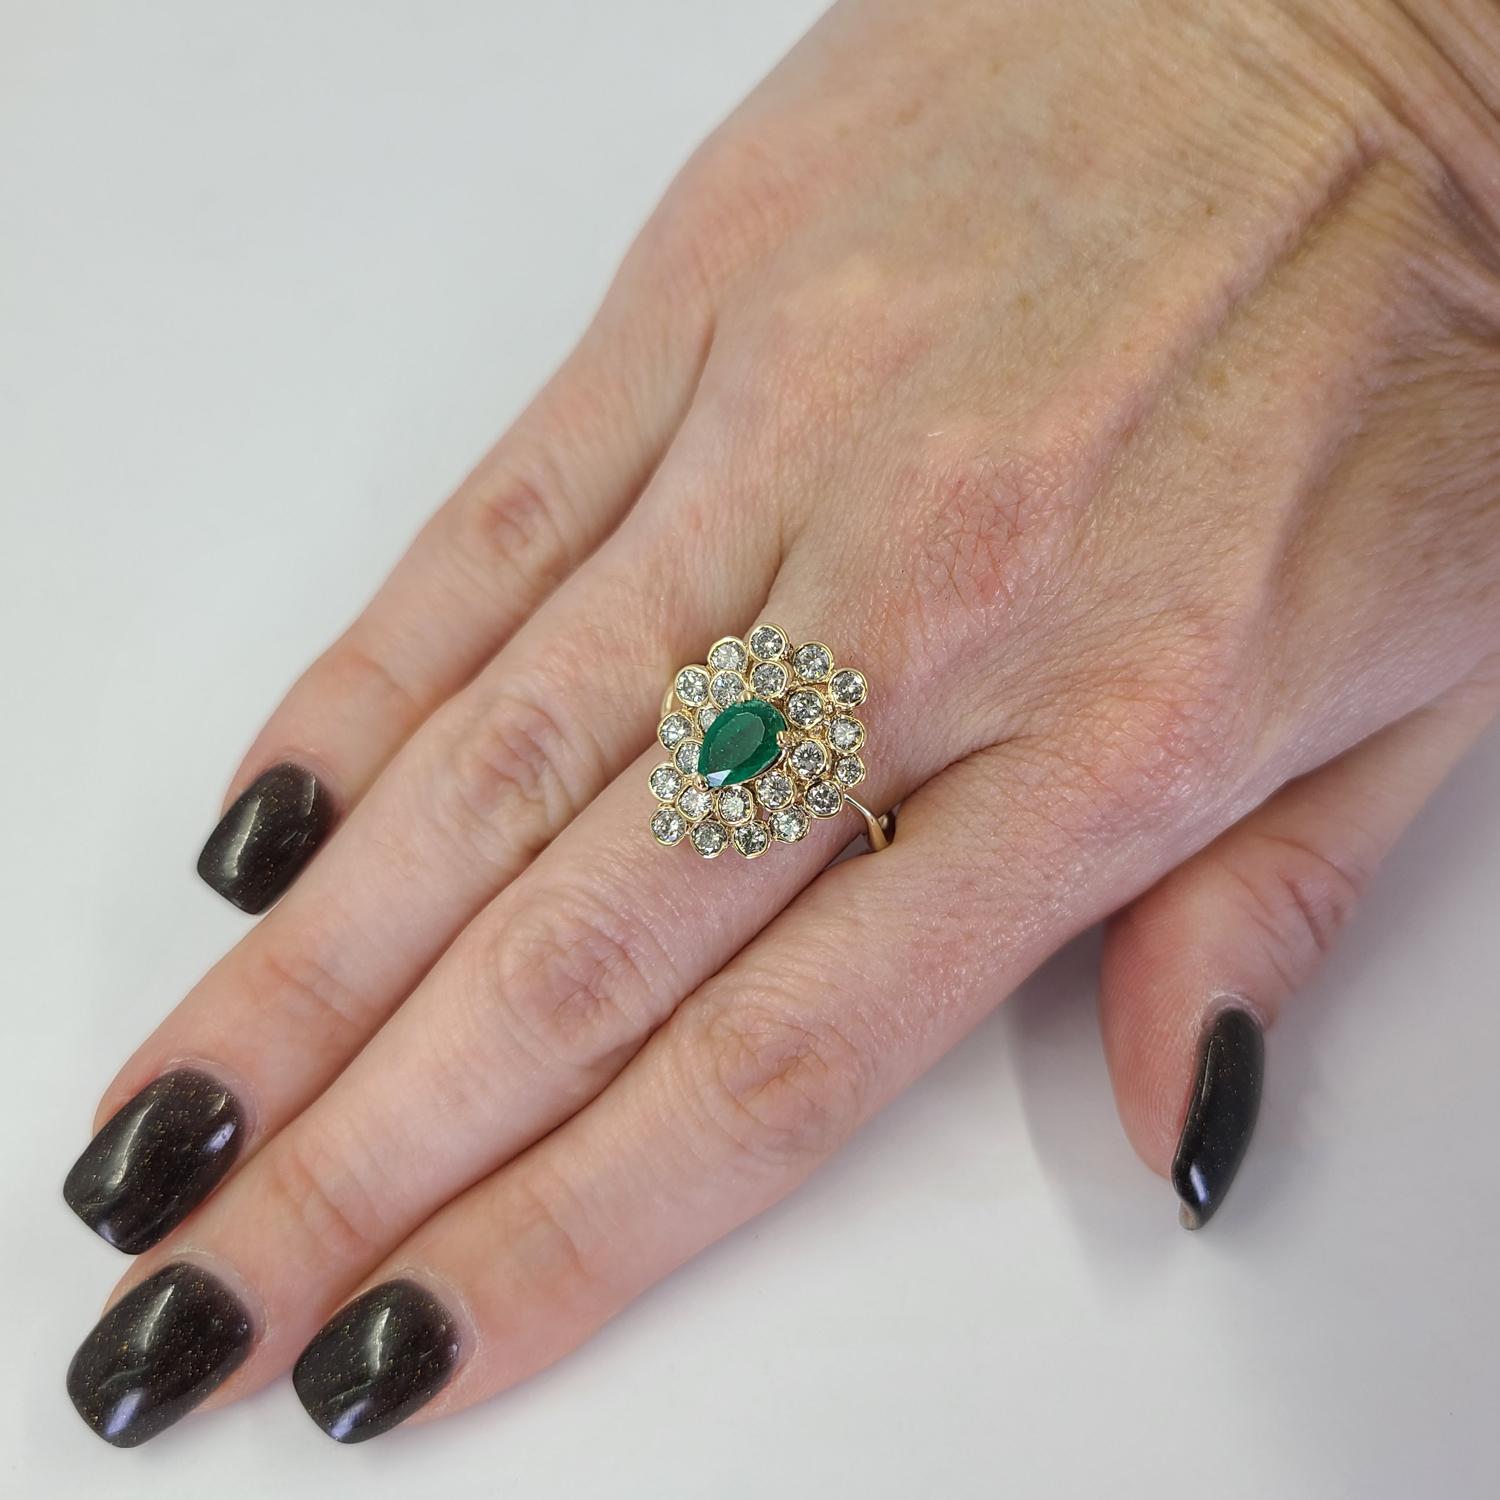 14 Karat Yellow Gold Cluster Ring Featuring A 0.50 Carat Pear Cut Emerald Accented By 23 Round Brilliant Cut Diamonds Of SI Clarity & J Color Totaling Approximately 1 Carat. Finger Size 8.5; Purchase Includes One Sizing Service. Finished Weight Is